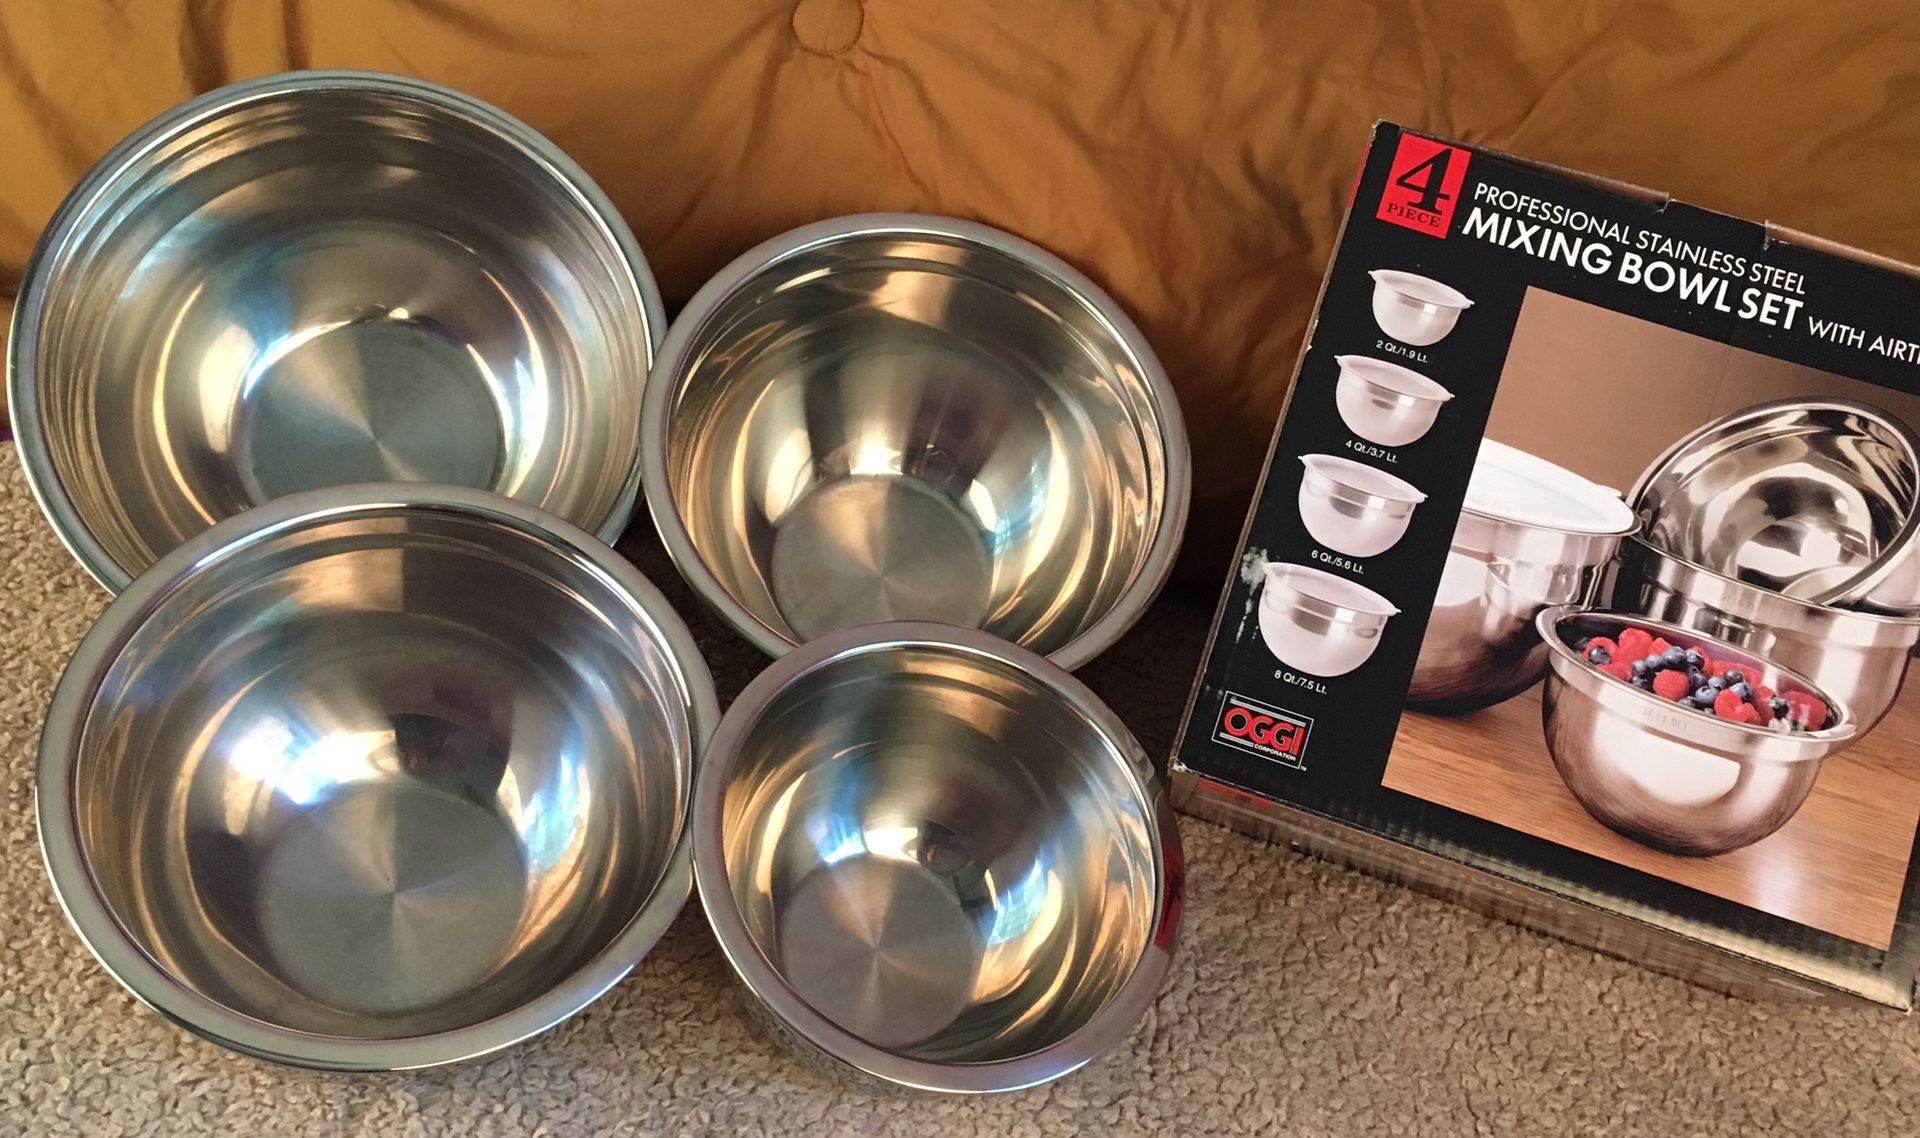 4 Professional Stainless Steel Mixing Bowls